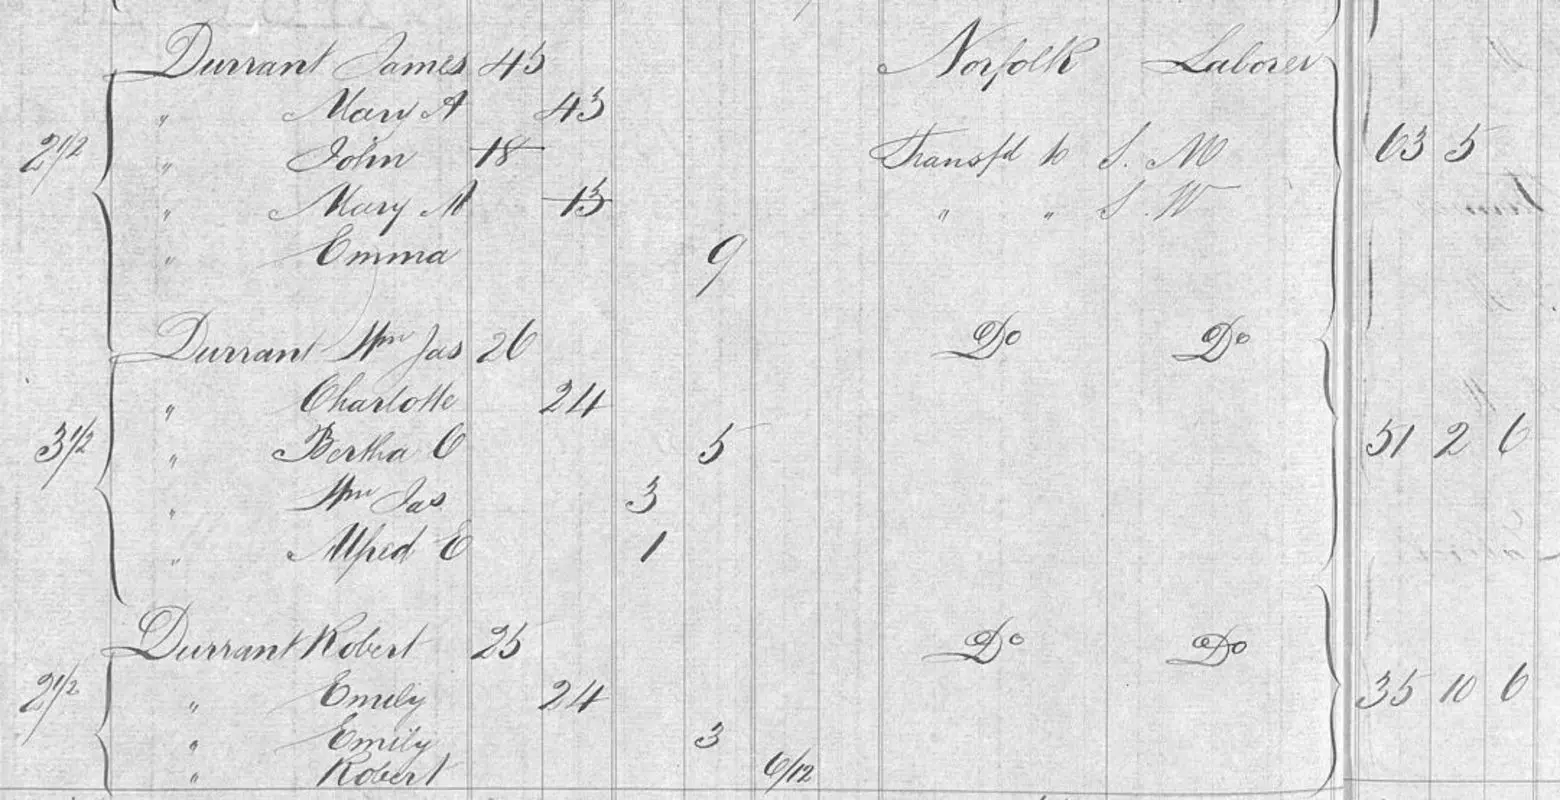 A detail from a page with finely handwritten names, dates and details in a ledger. 